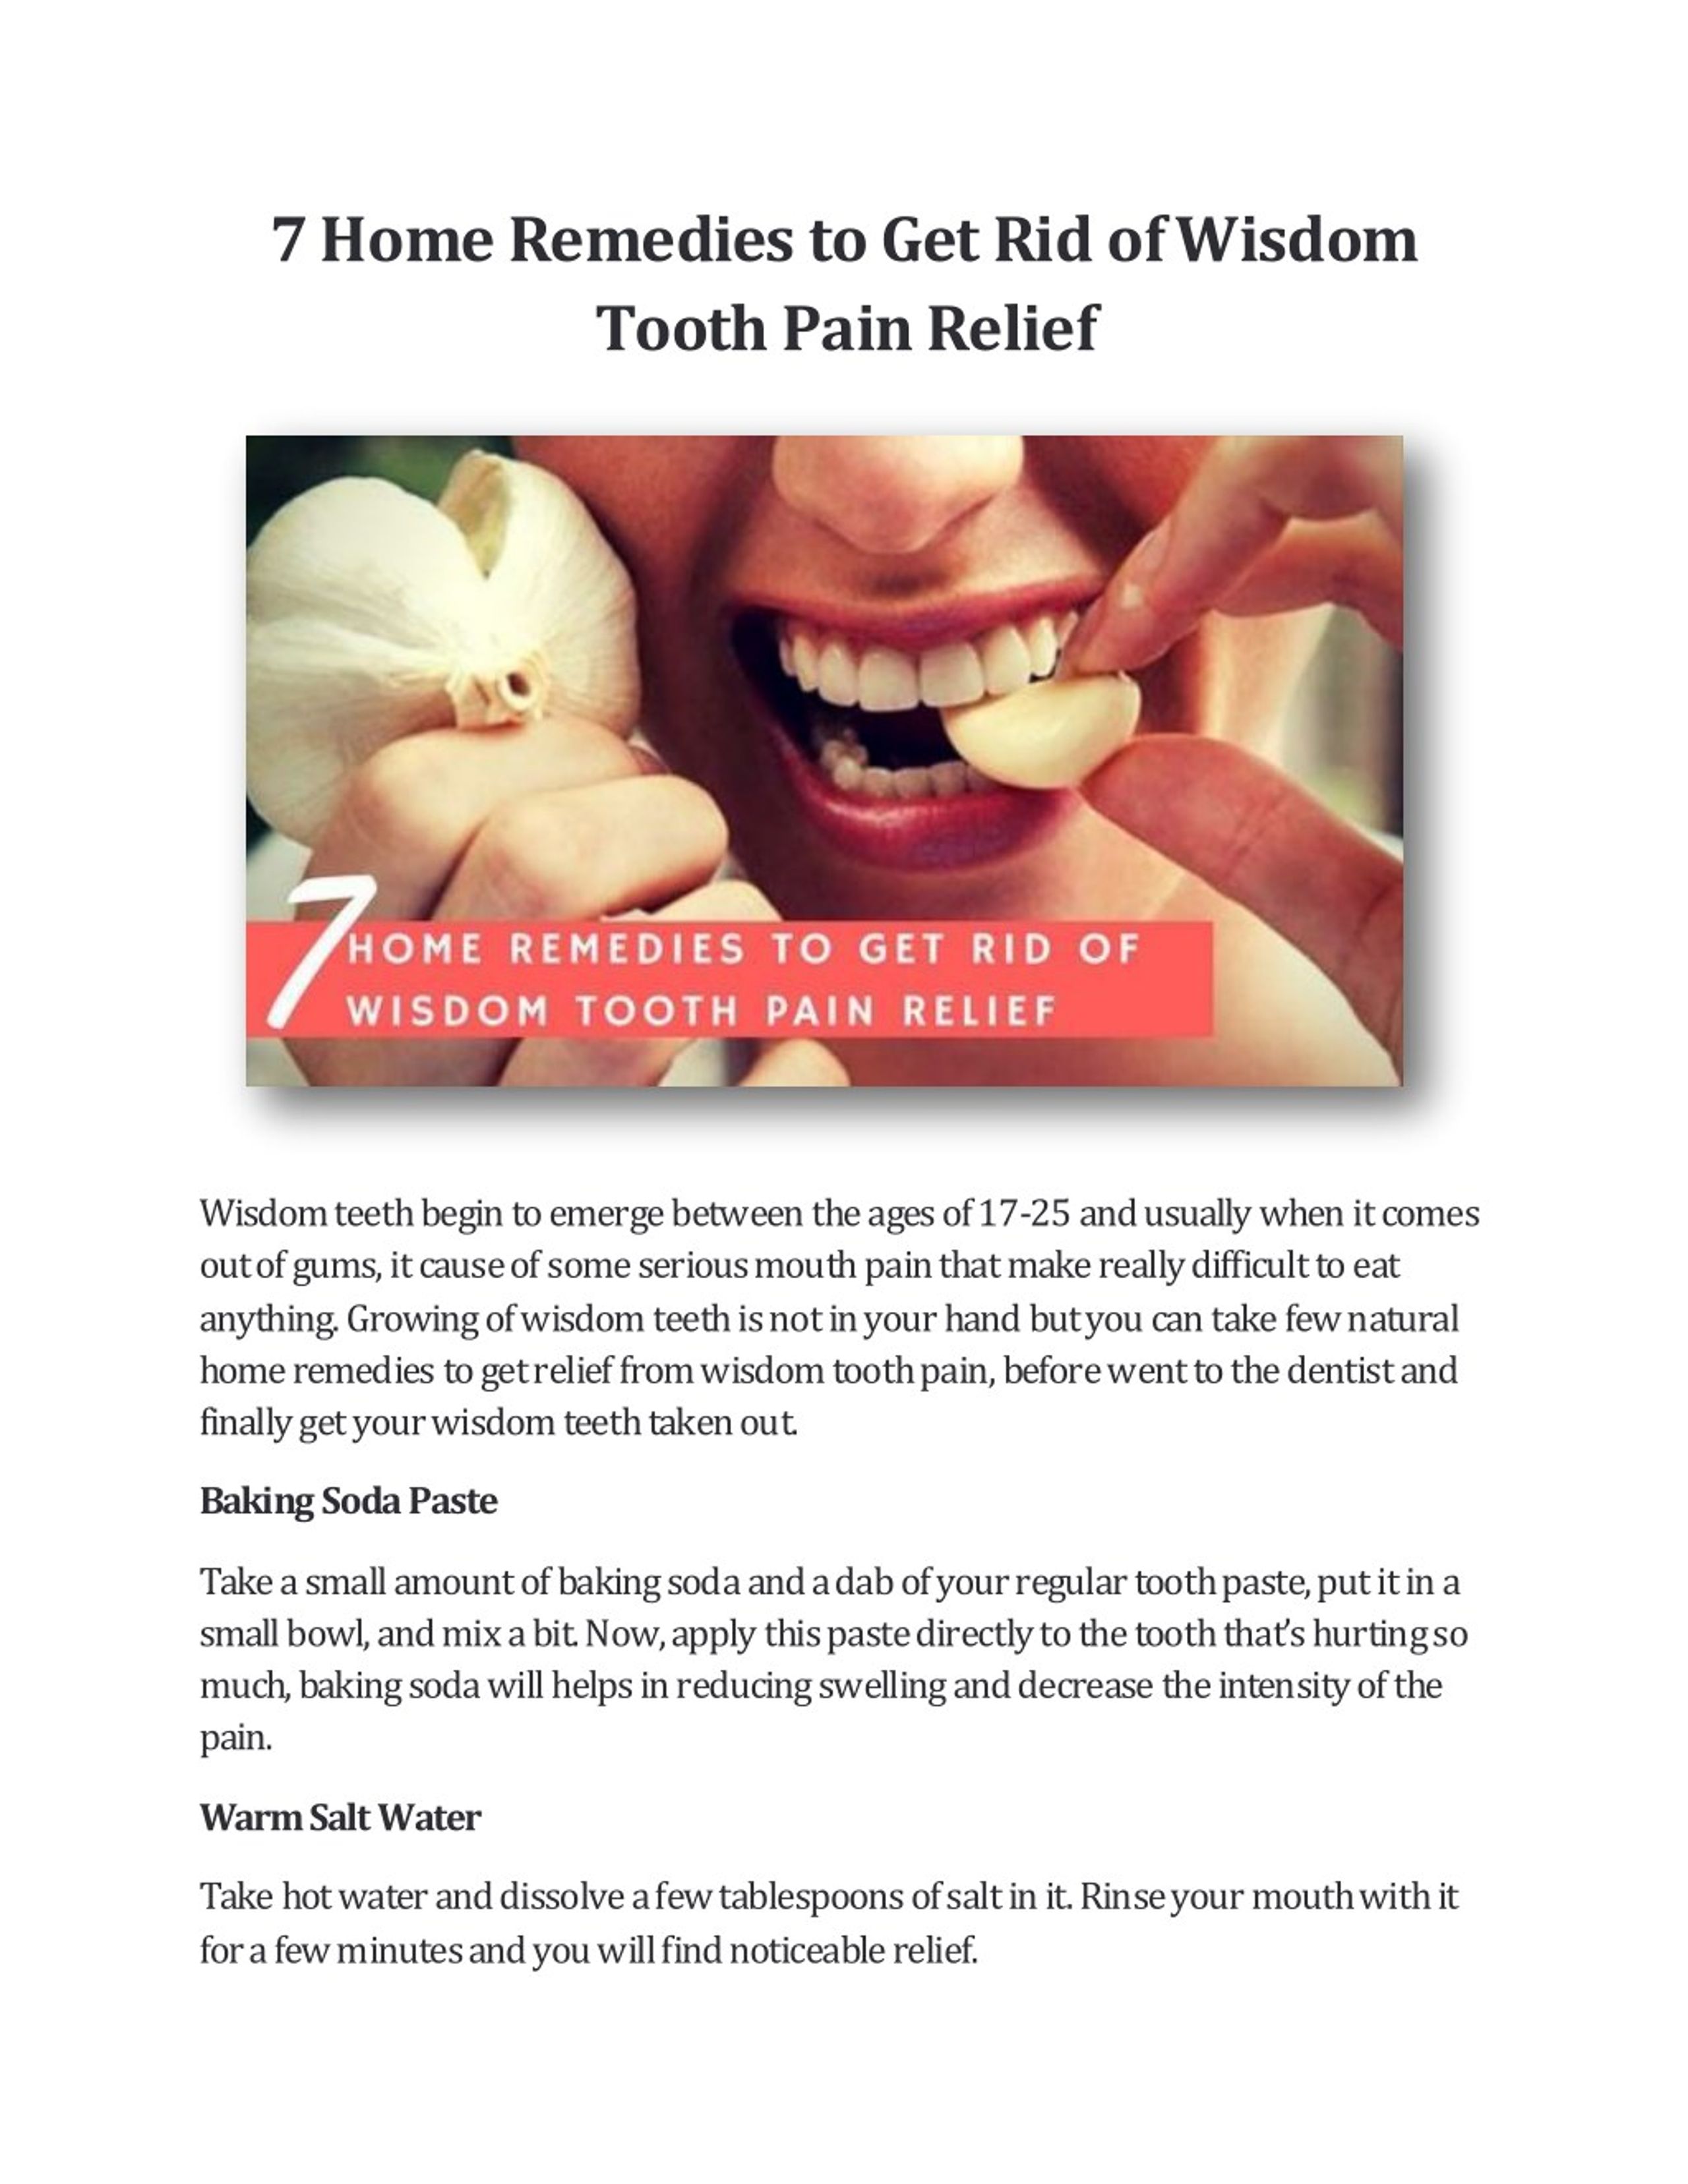 PPT 7 Home Remedies to Get Rid of Wisdom Tooth Pain